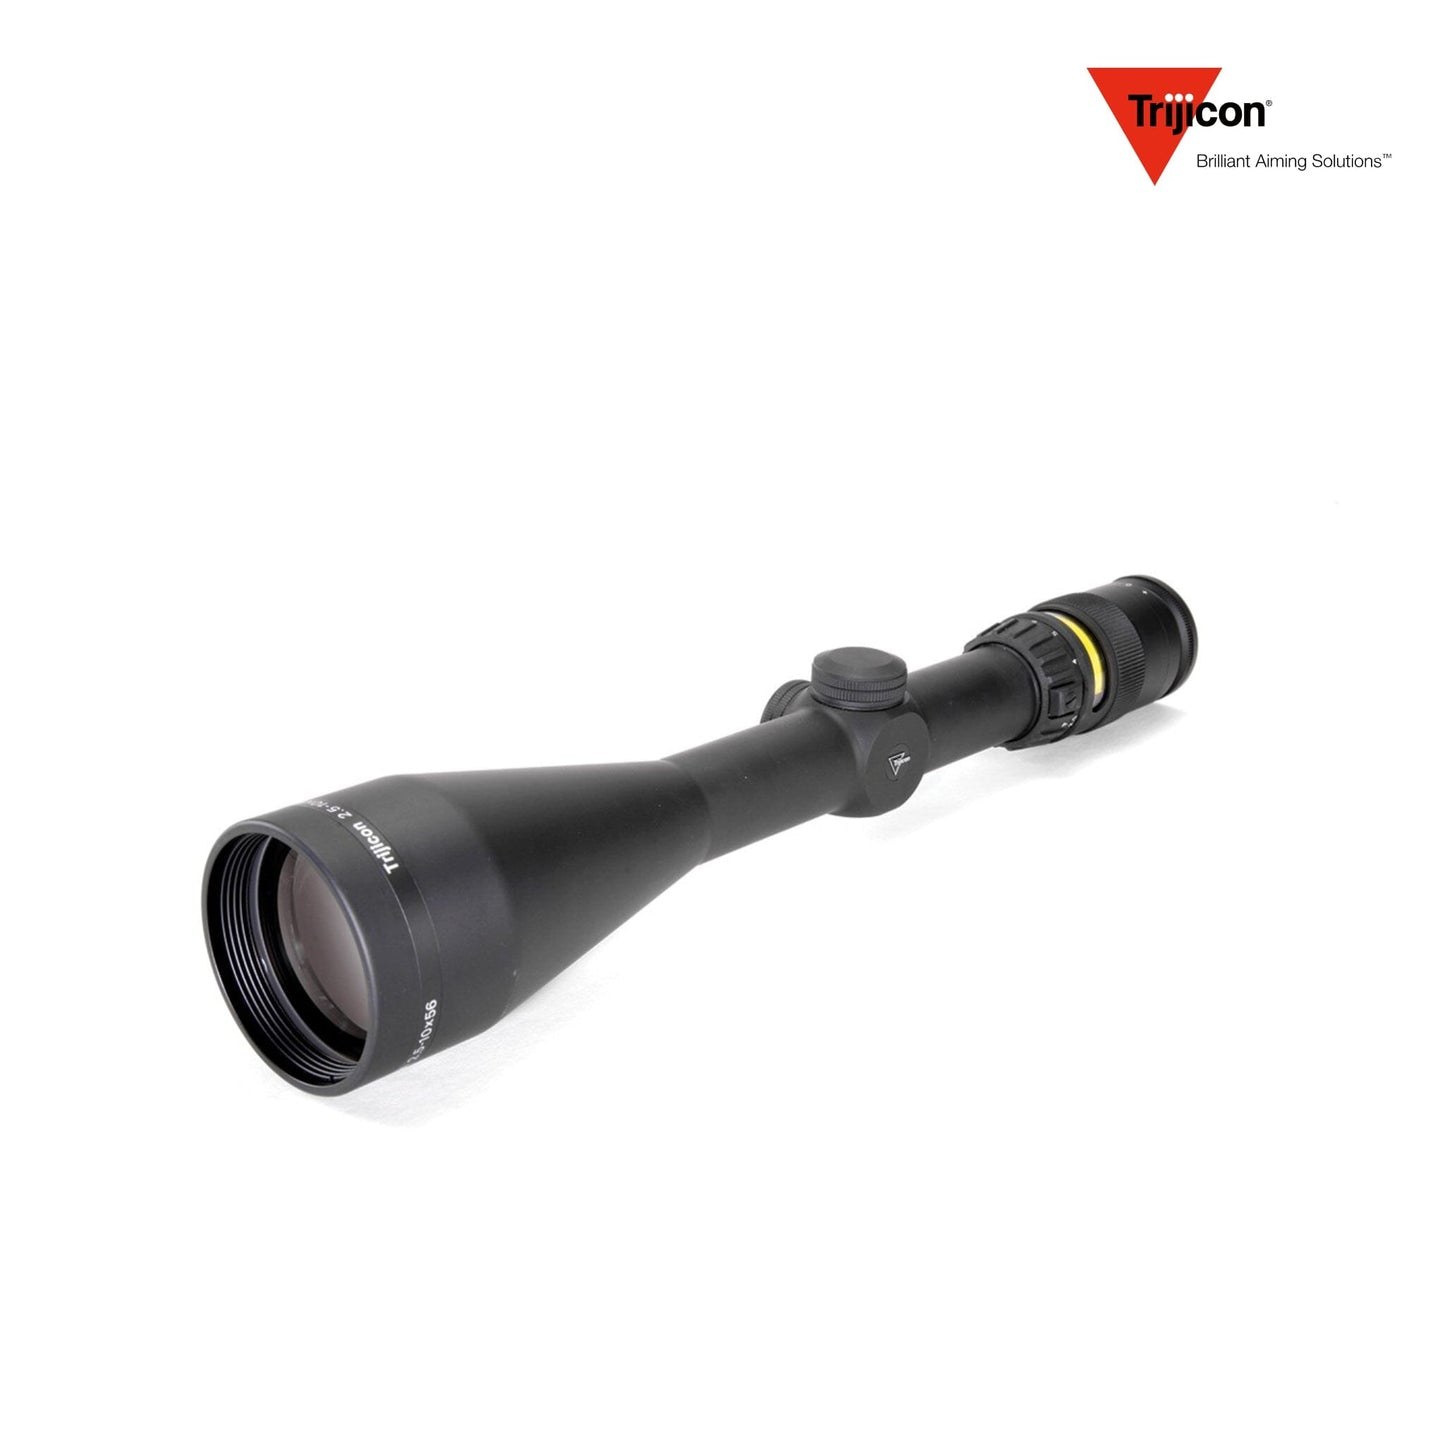 Trijicon AccuPoint 2.5-10x56 Rifle Scope MIL-Dot Crosshair with Amber Dot Reticle TR22-2 Rifle Scope Trijicon 